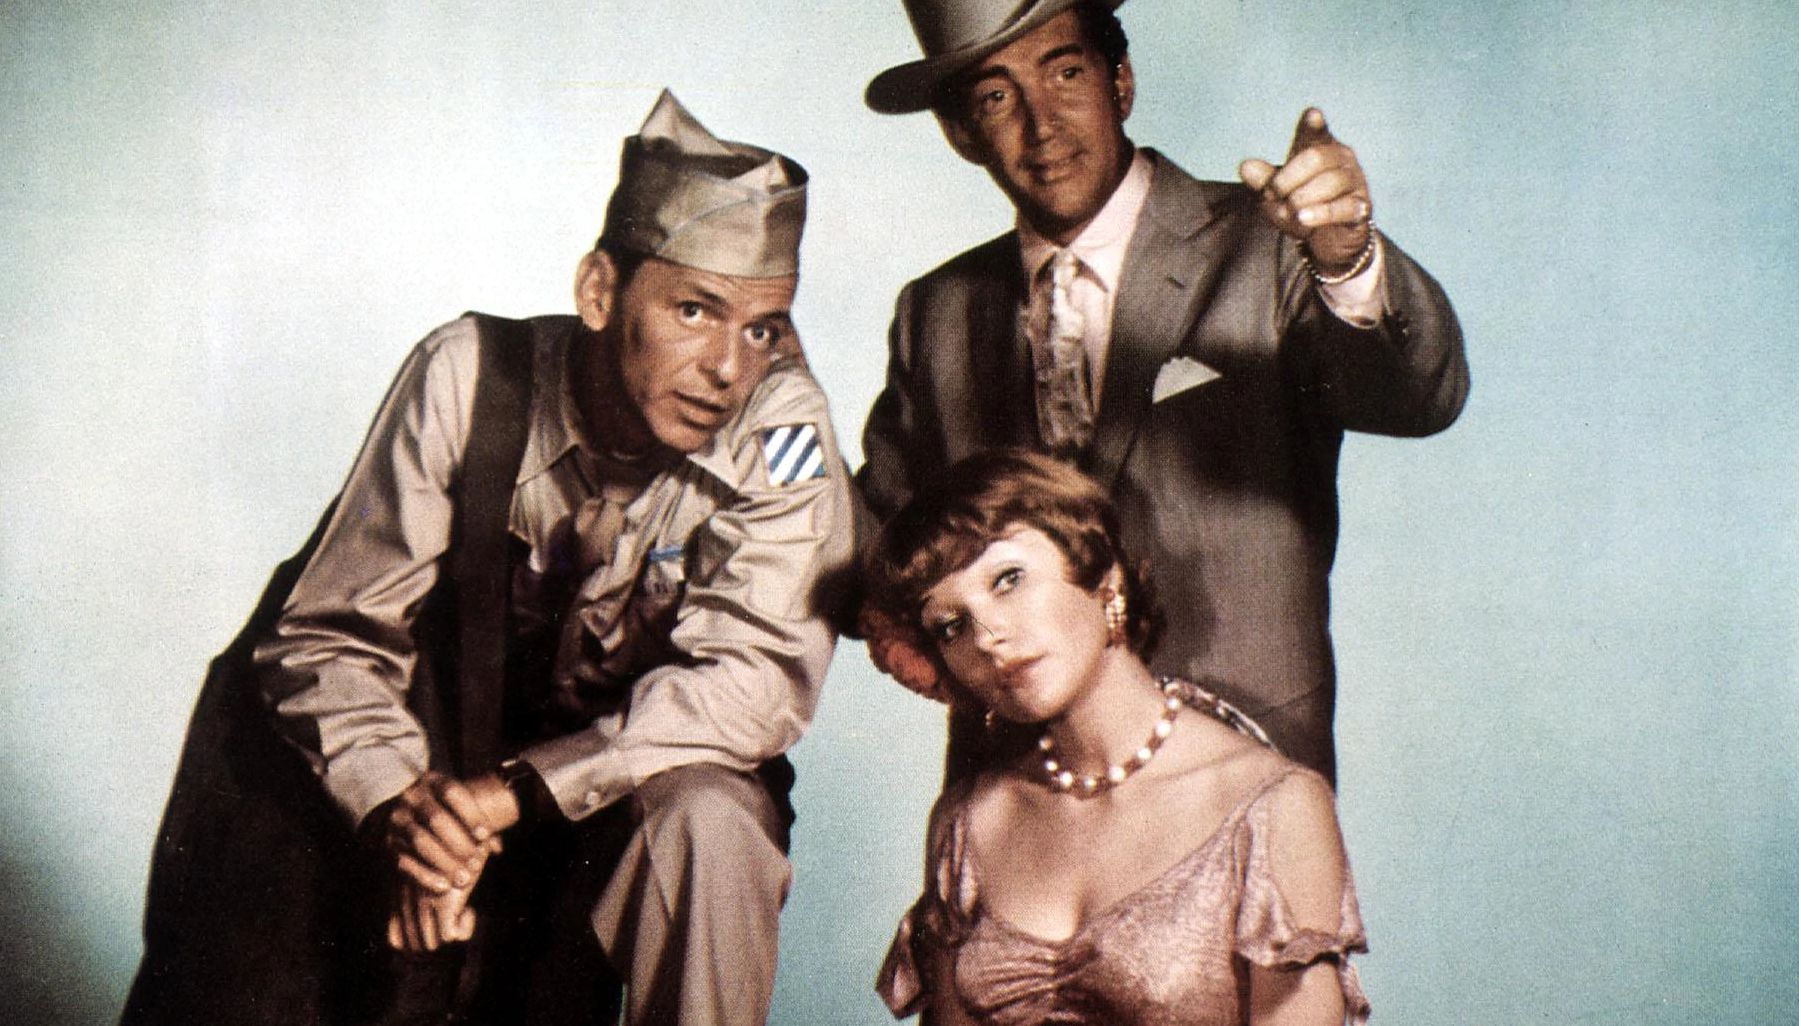 Frank Sinatra, Dean Martin and Shirley MacLaine in the film Some Came Running